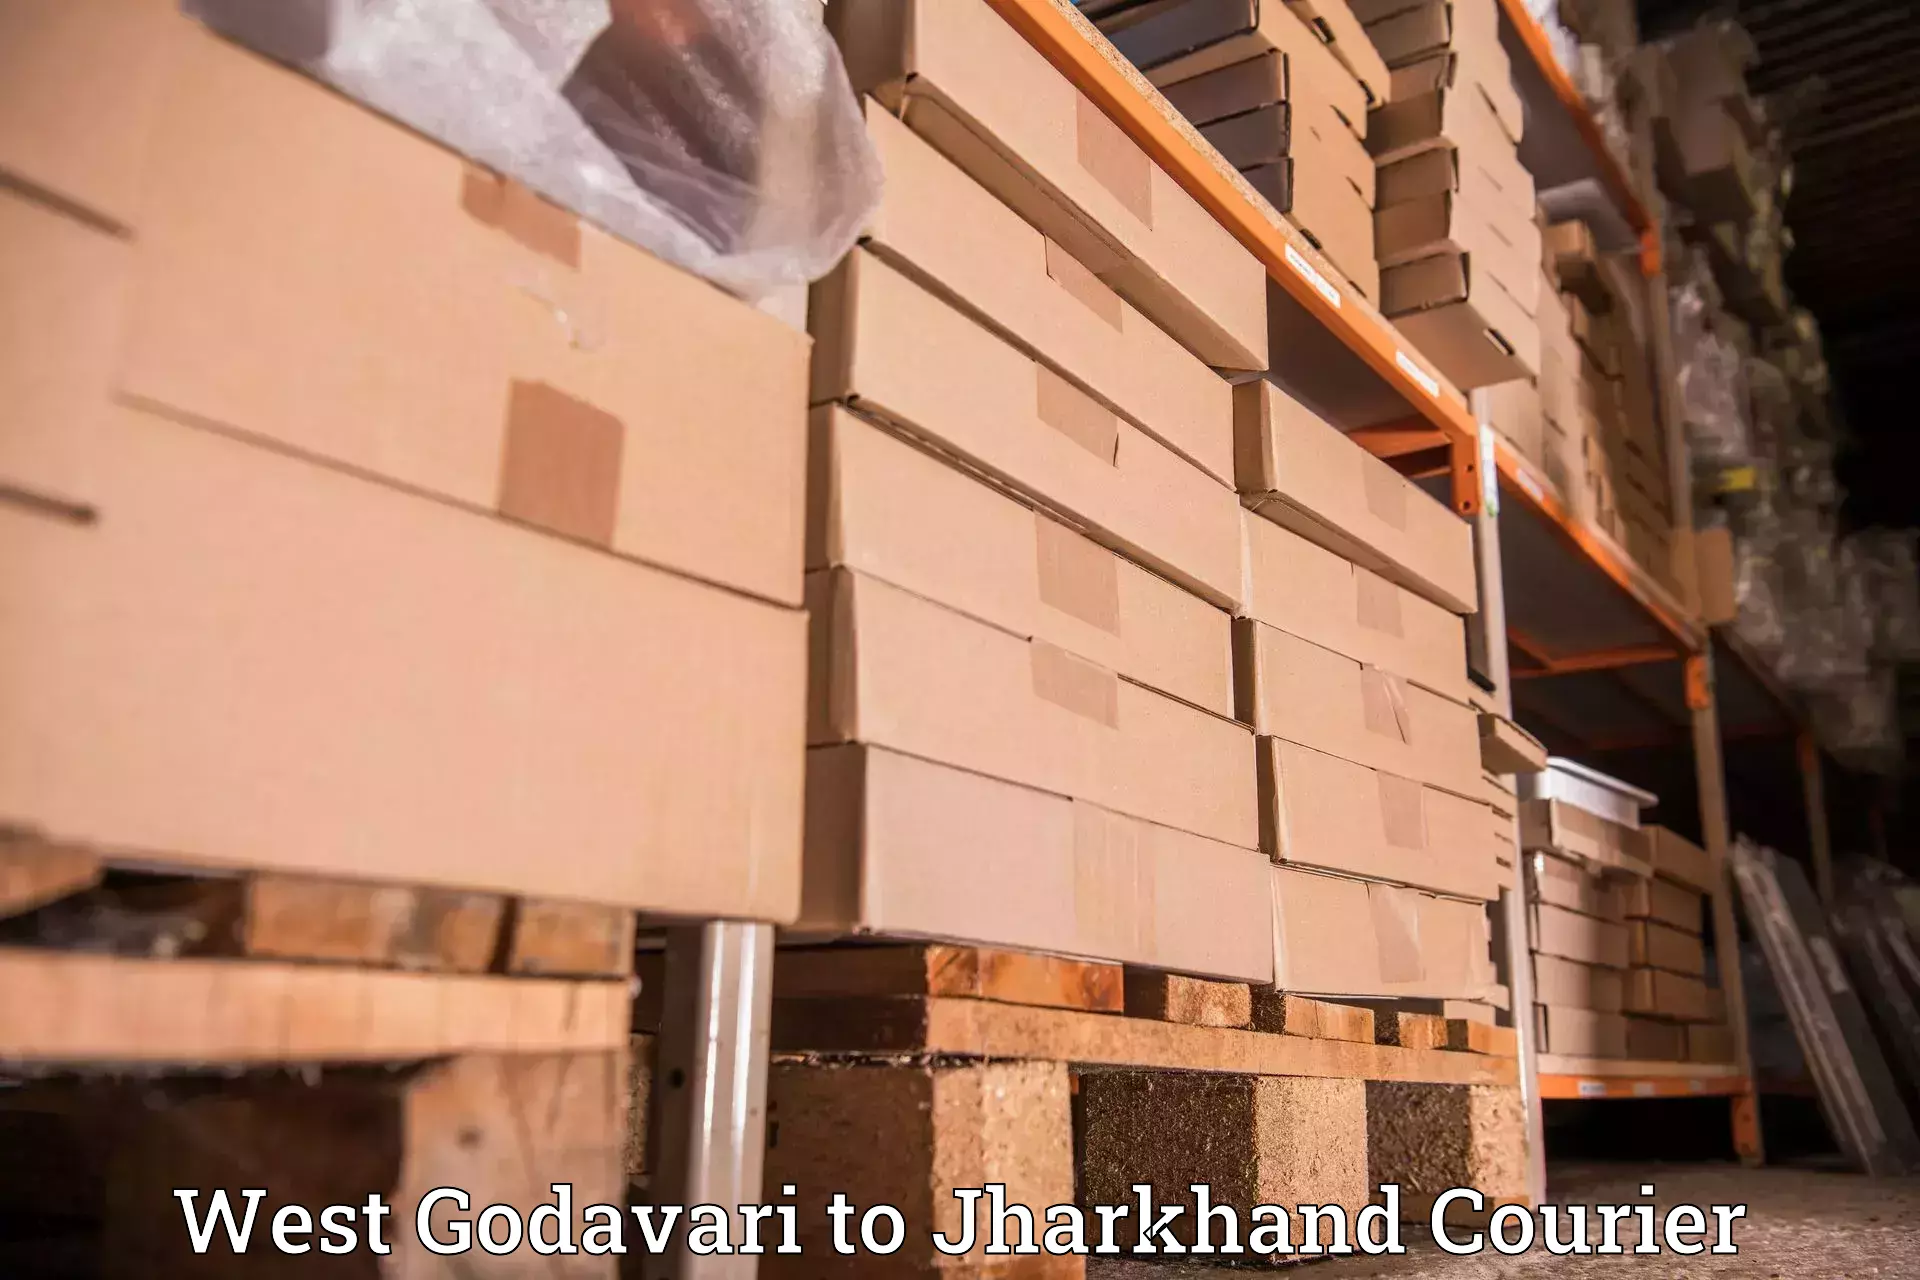 Business delivery service West Godavari to IIT Dhanbad